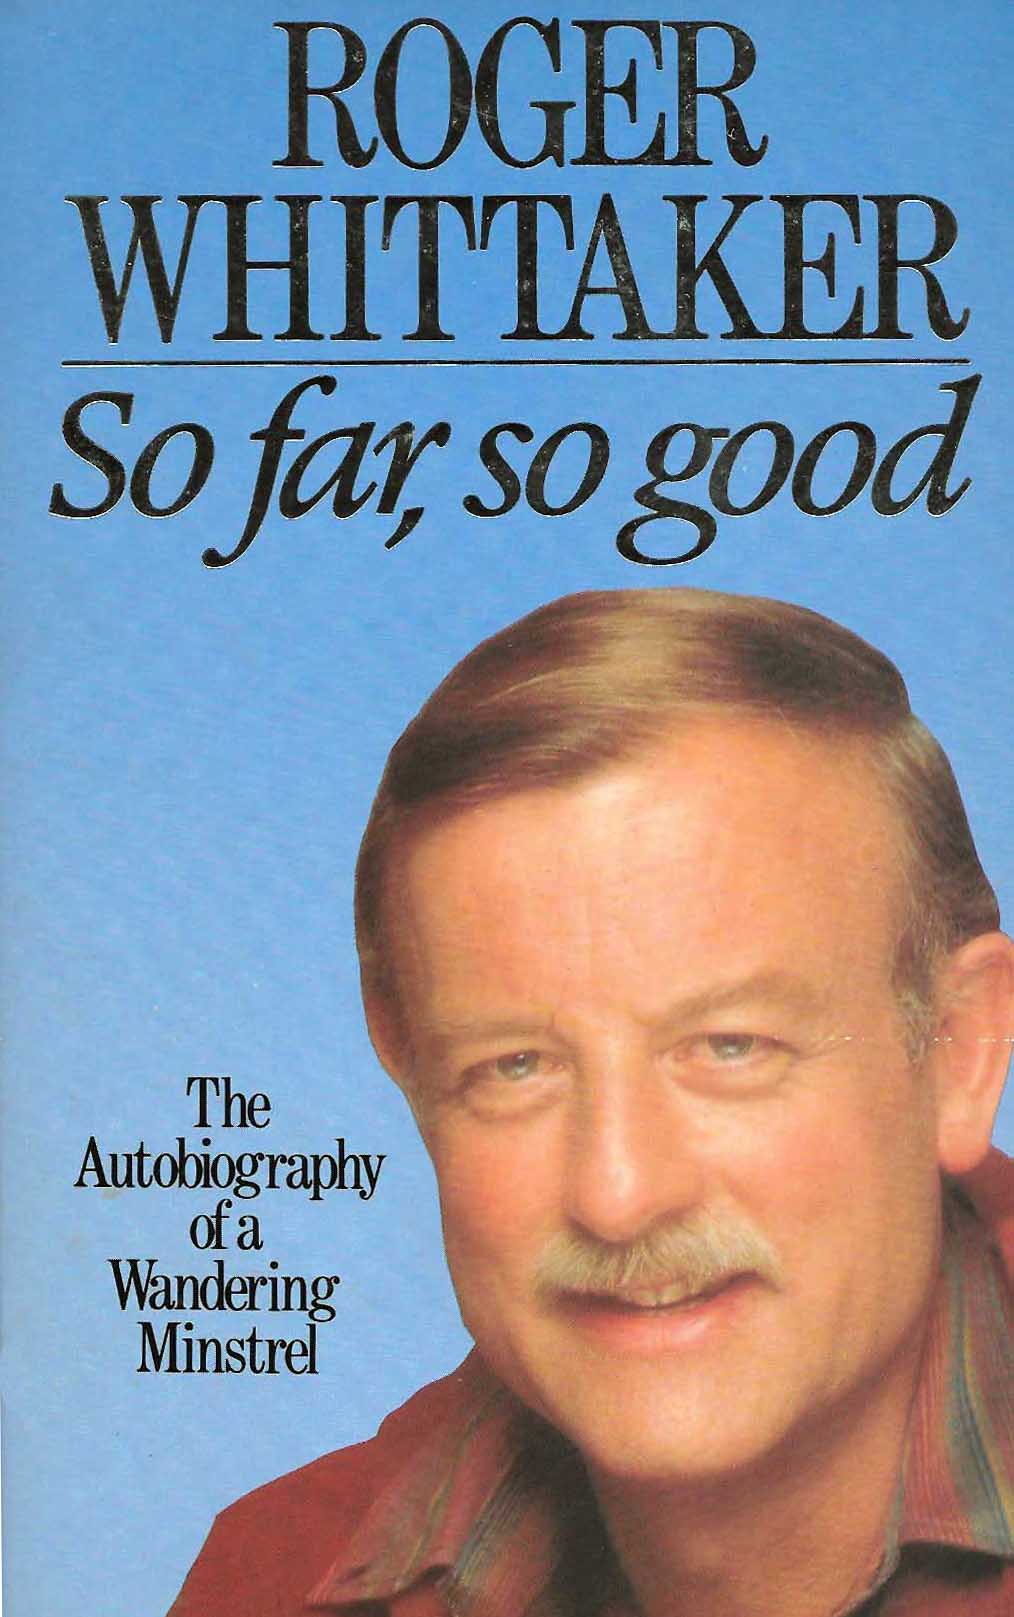 Roger Whittaker's autobiography